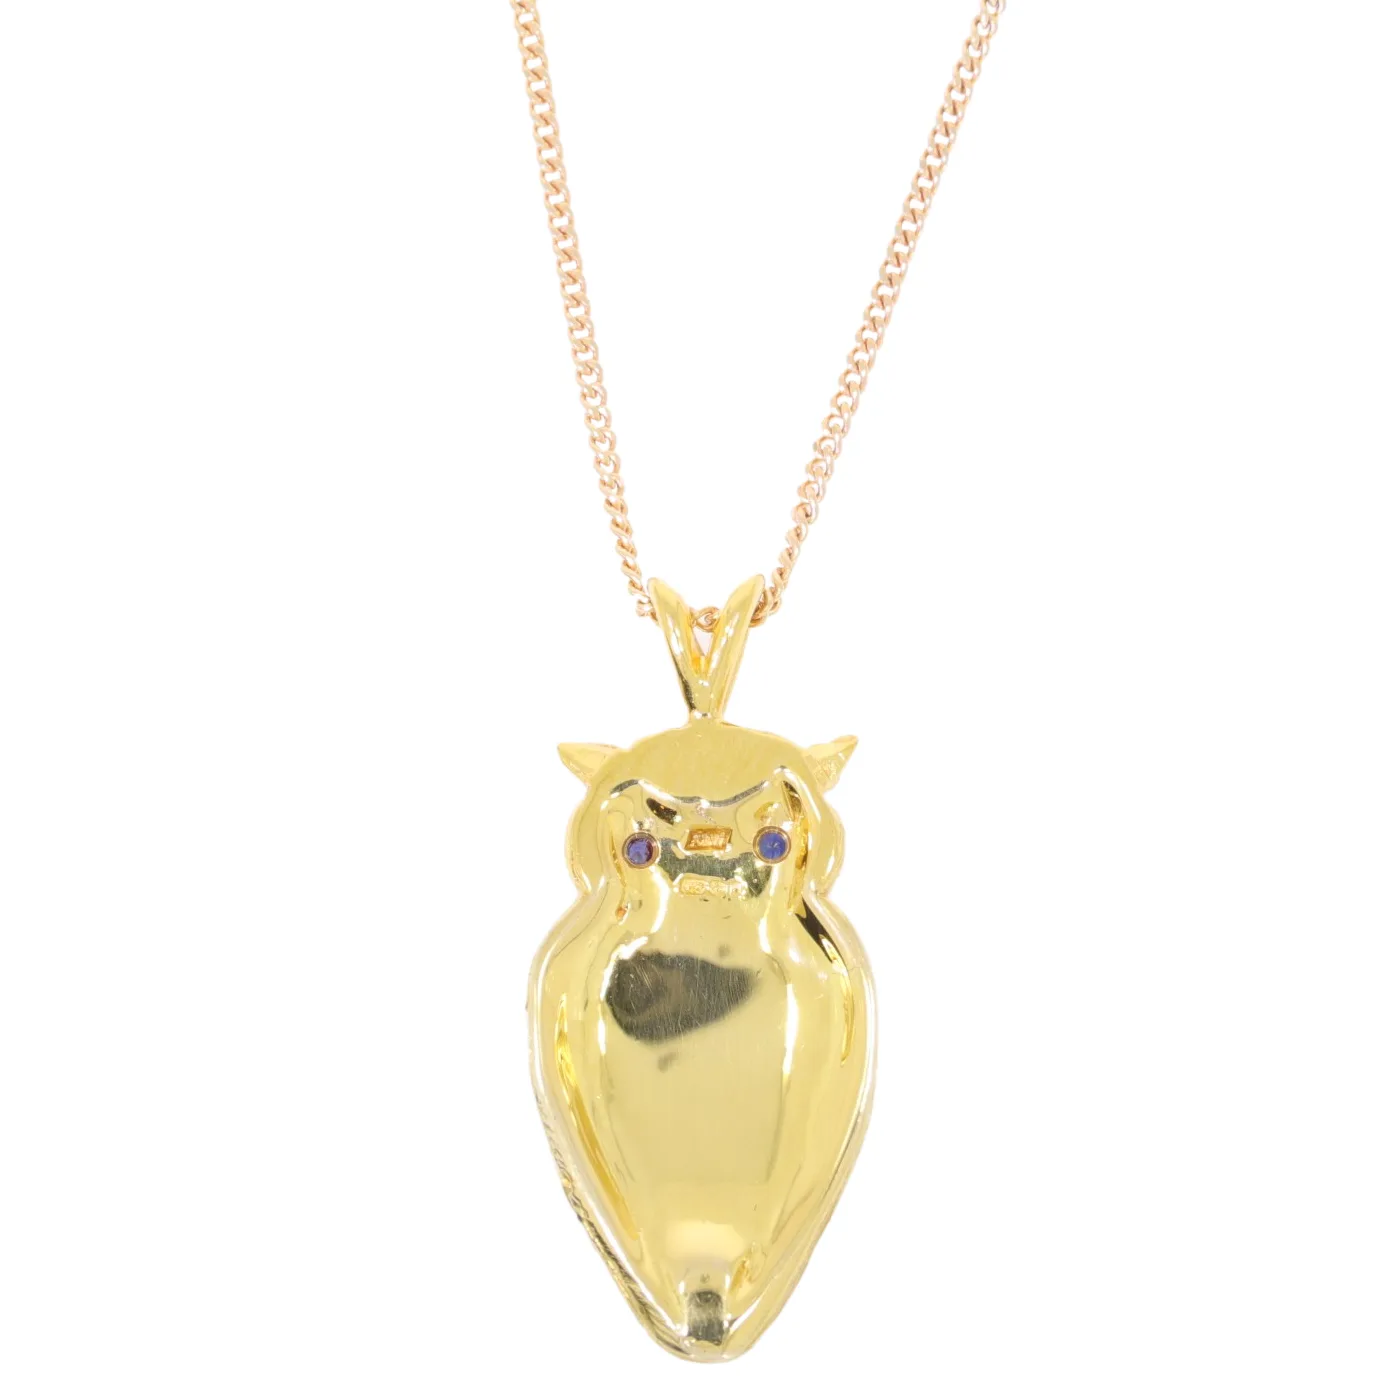 9ct yellow gold owl pendant with sapphire eyes and necklet - Connard ...